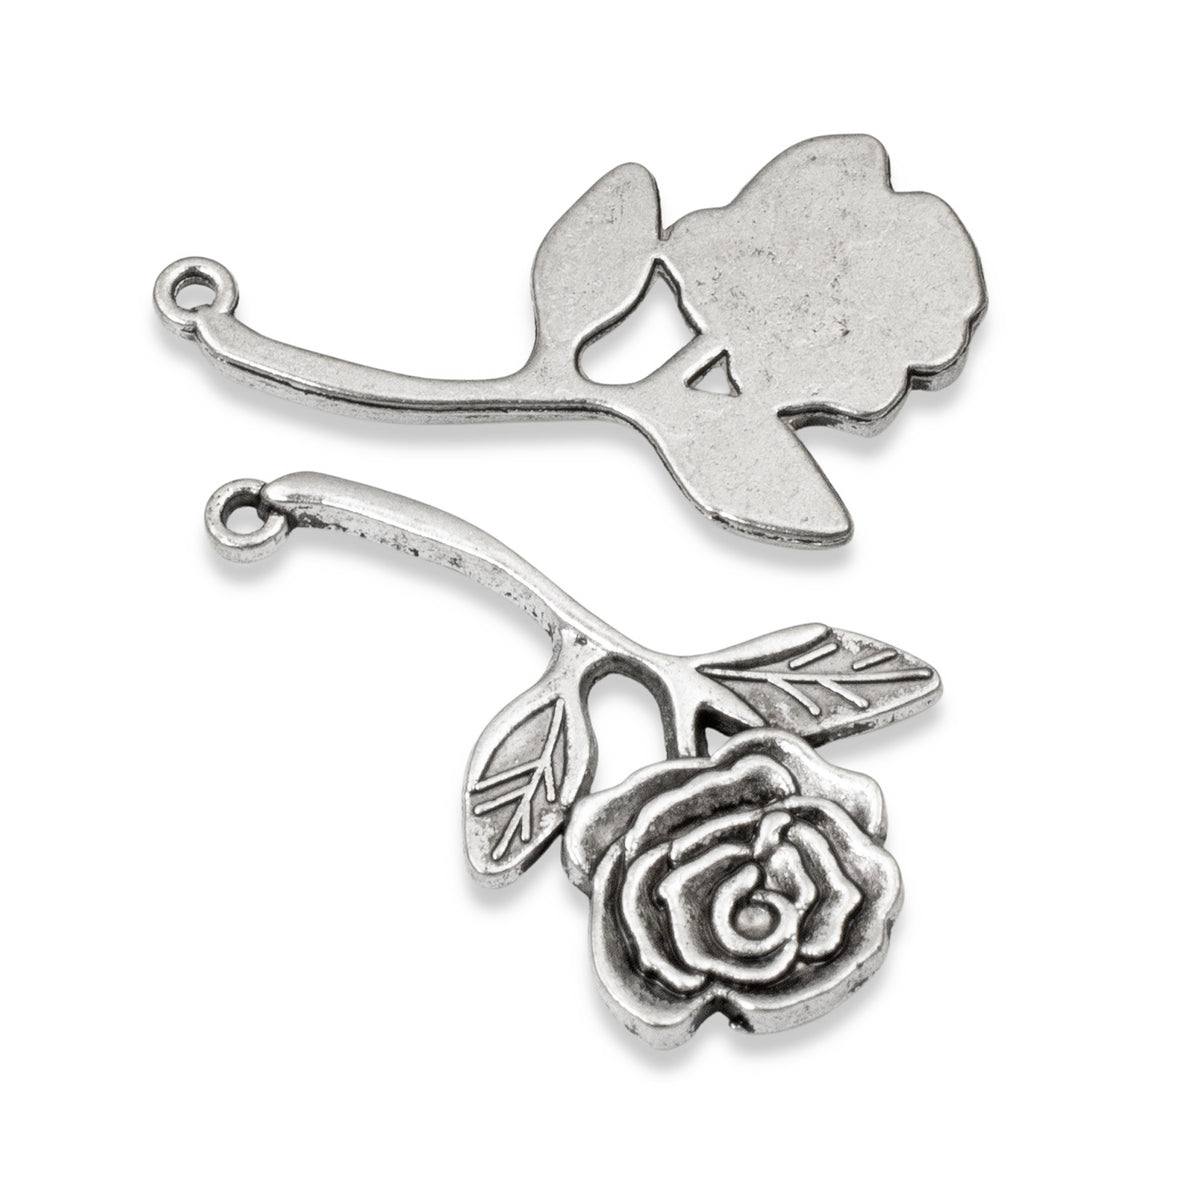 12 Rose Charms for Jewelry Making | Hackberry Creek